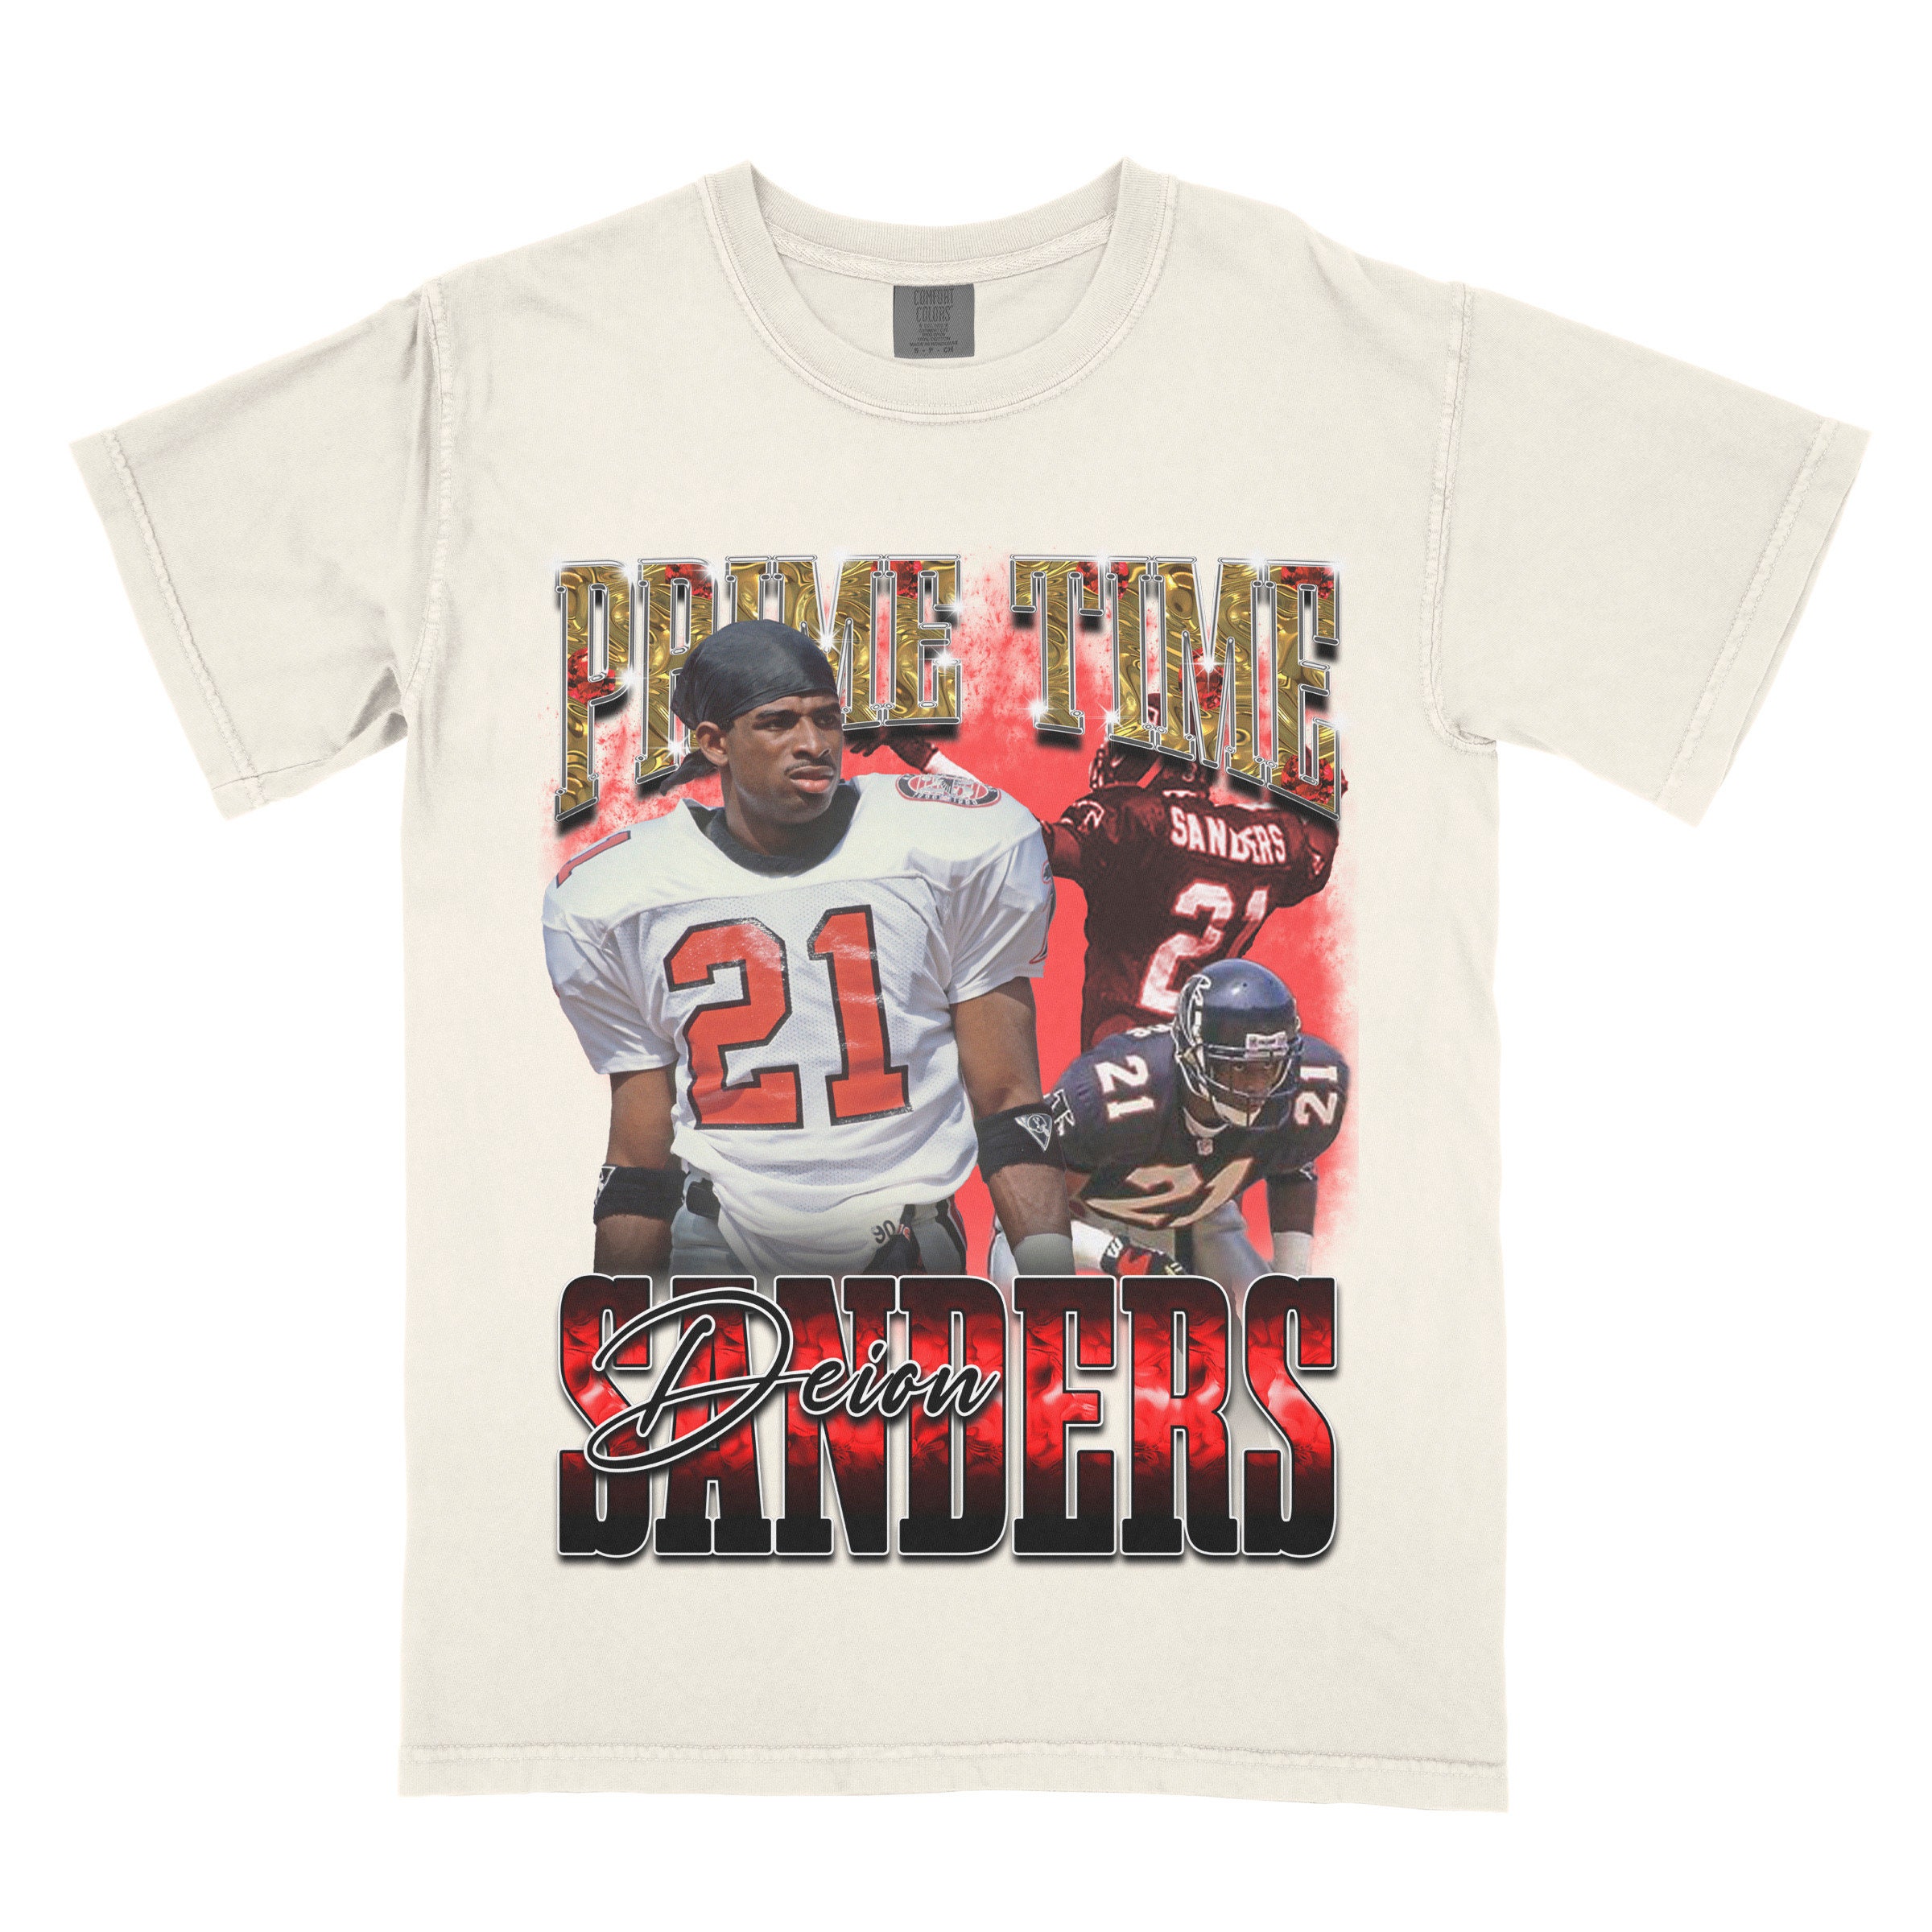 Get Prime Time Deion Sanders San Francisco Retro 49ers Throwback Niners  Classic Shirt The City For Free Shipping • Custom Xmas Gift